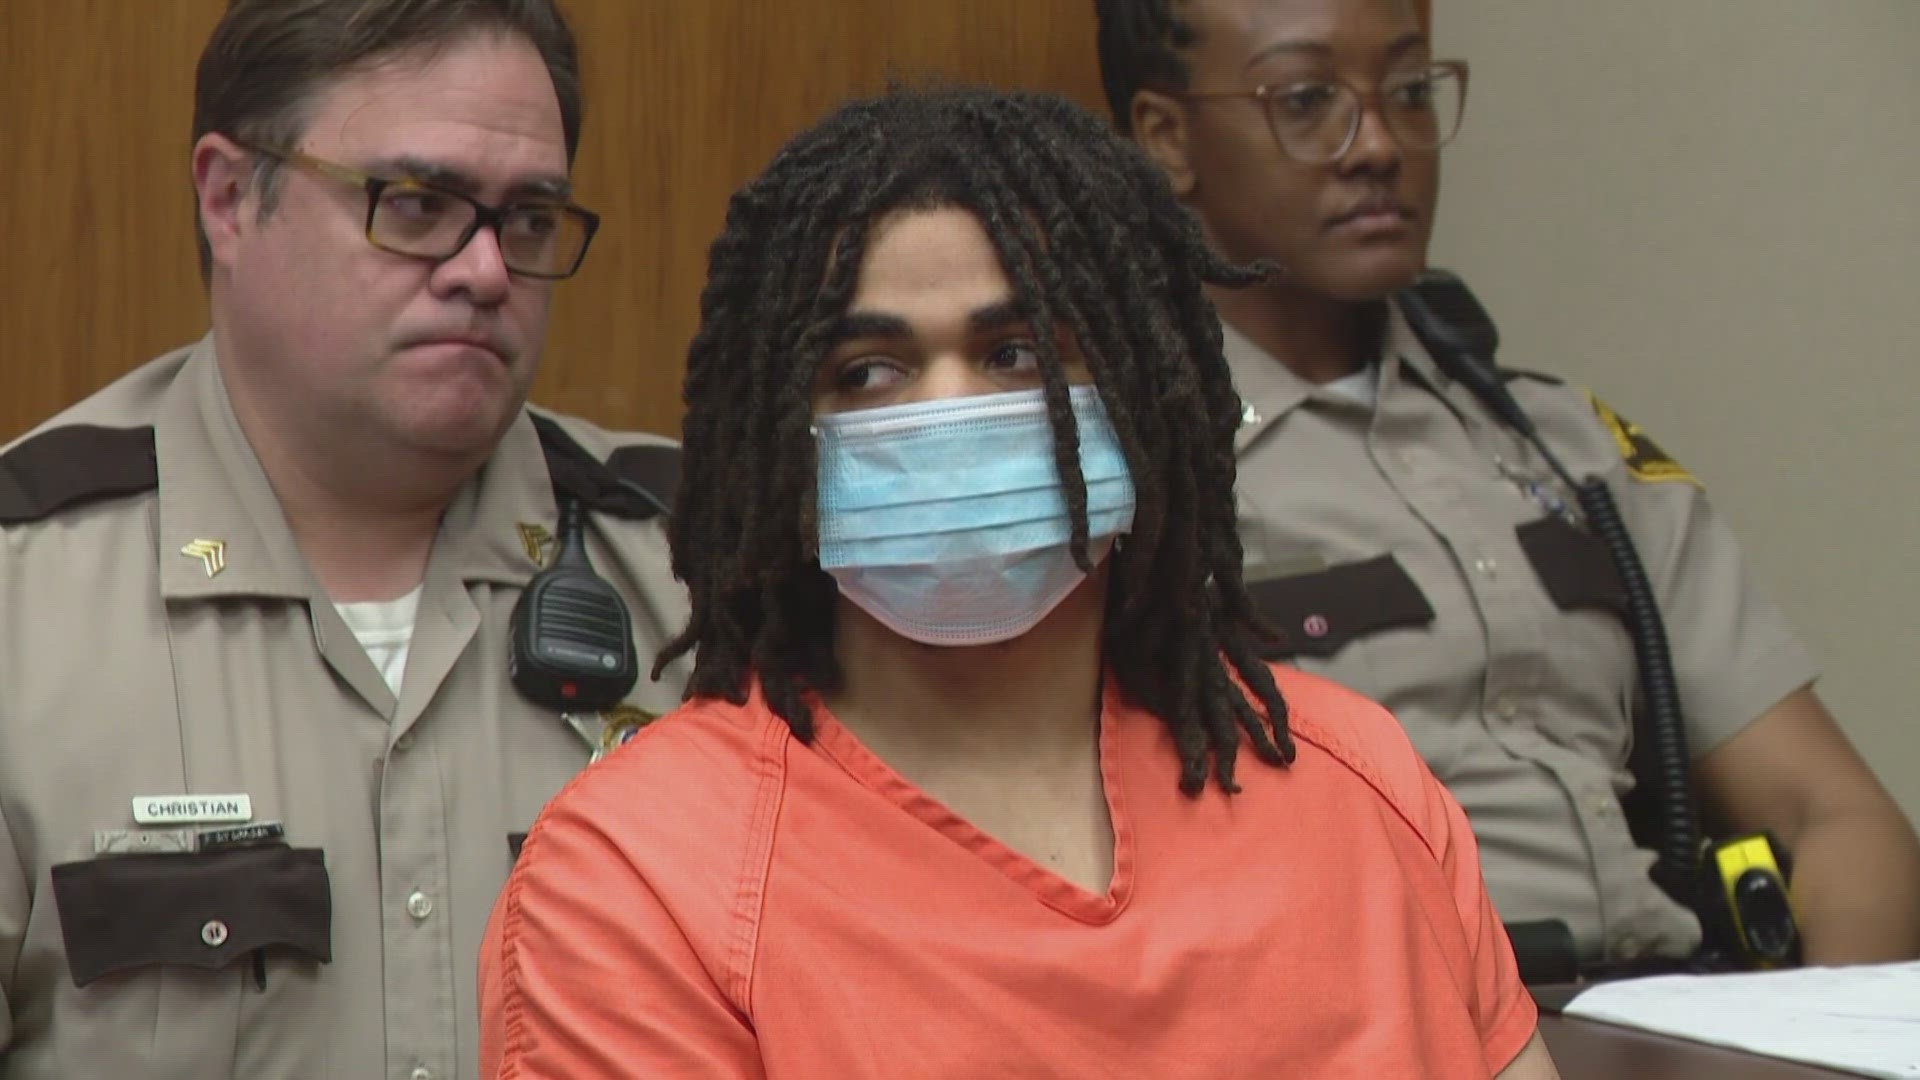 Daniel Riley was sentenced Thursday to nearly 19 years in prison for causing the accident that cost a Tennessee teenager her legs. Watch the full sentencing here.